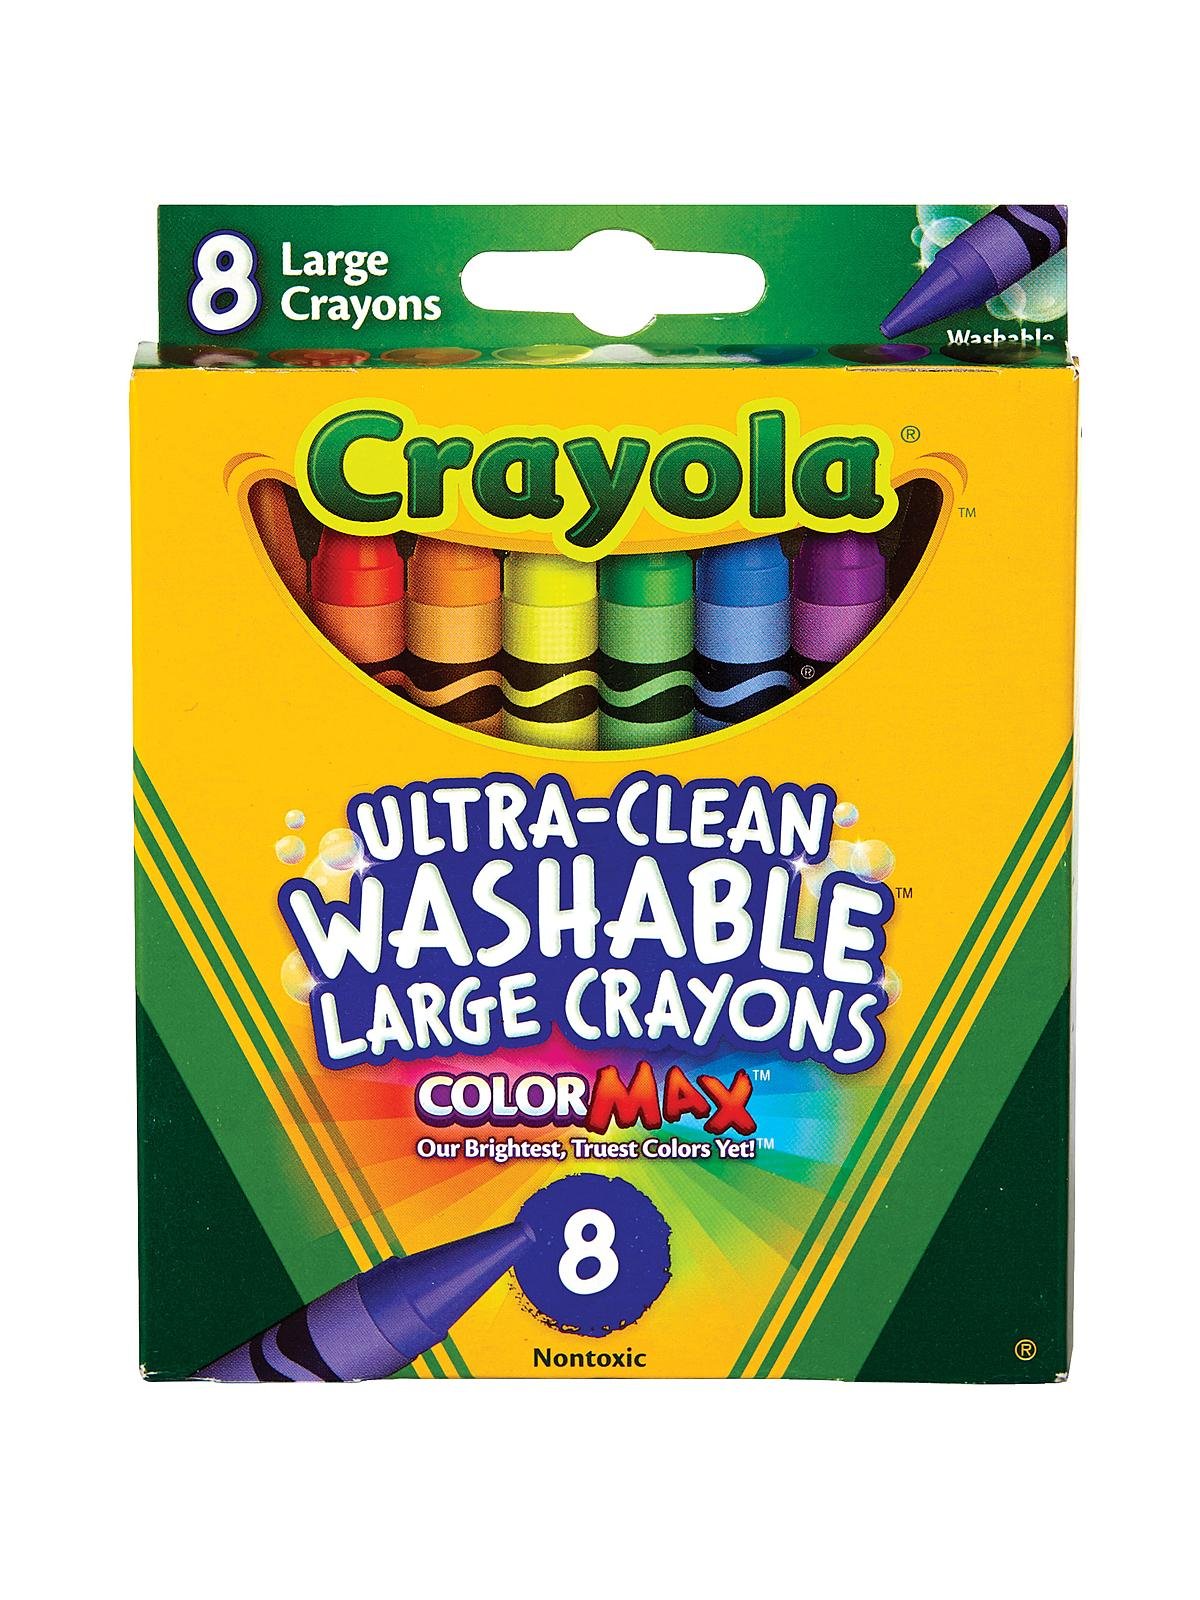 Crayola Ultra-clean Washable Large Crayons